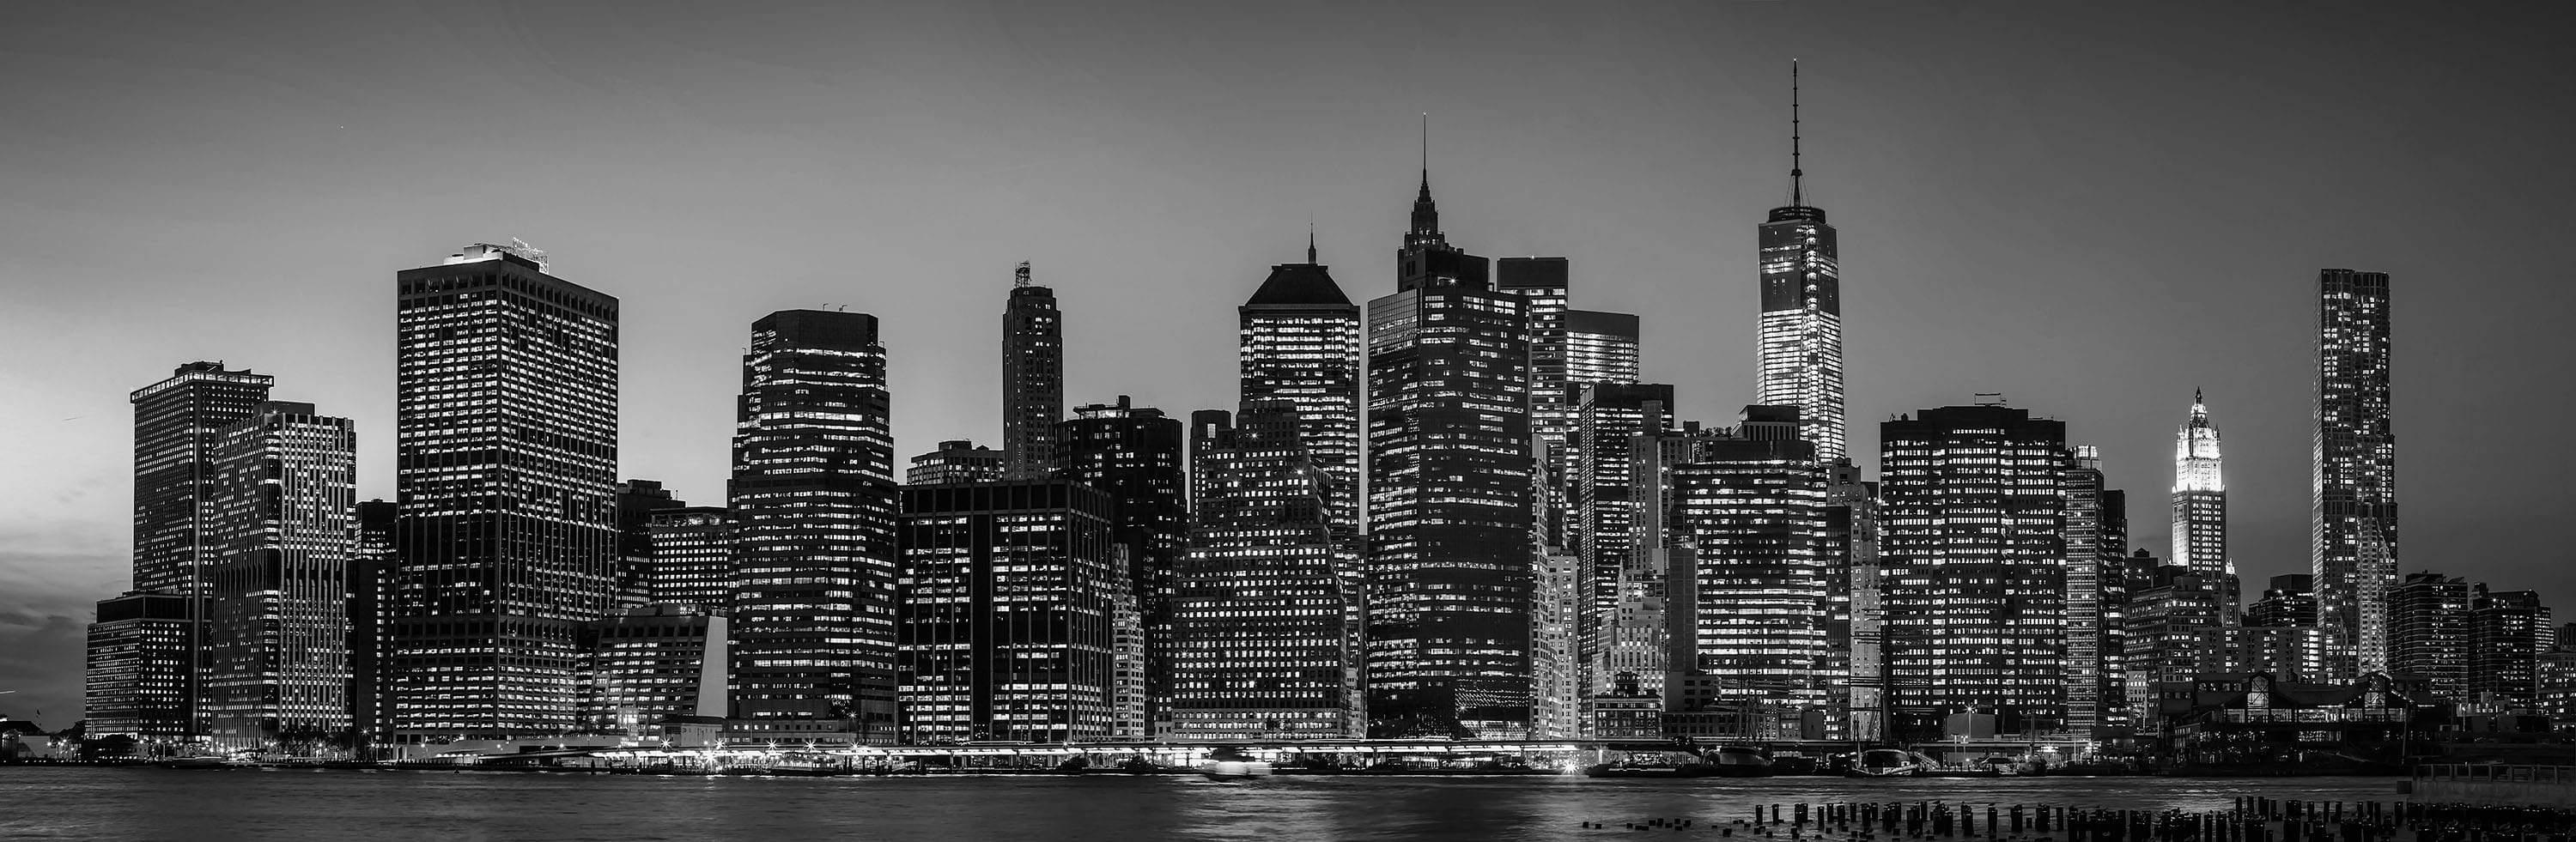 Black and White Chicago Skyline at Night  Wallpaper, Peel-N-Stick and Removes Easily Anytime